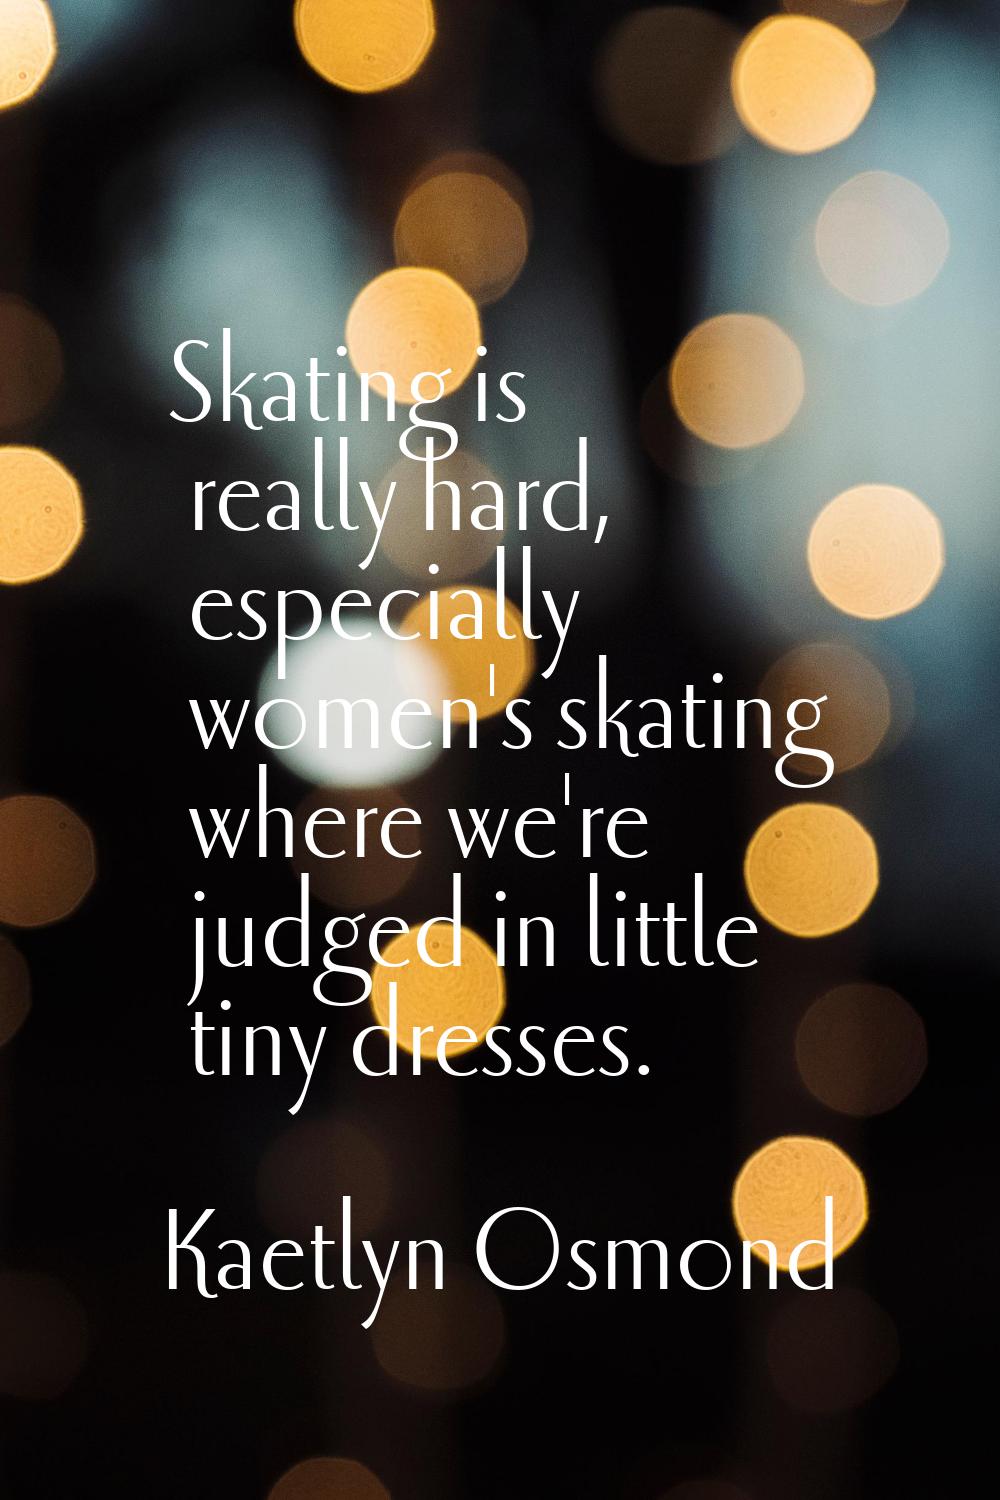 Skating is really hard, especially women's skating where we're judged in little tiny dresses.